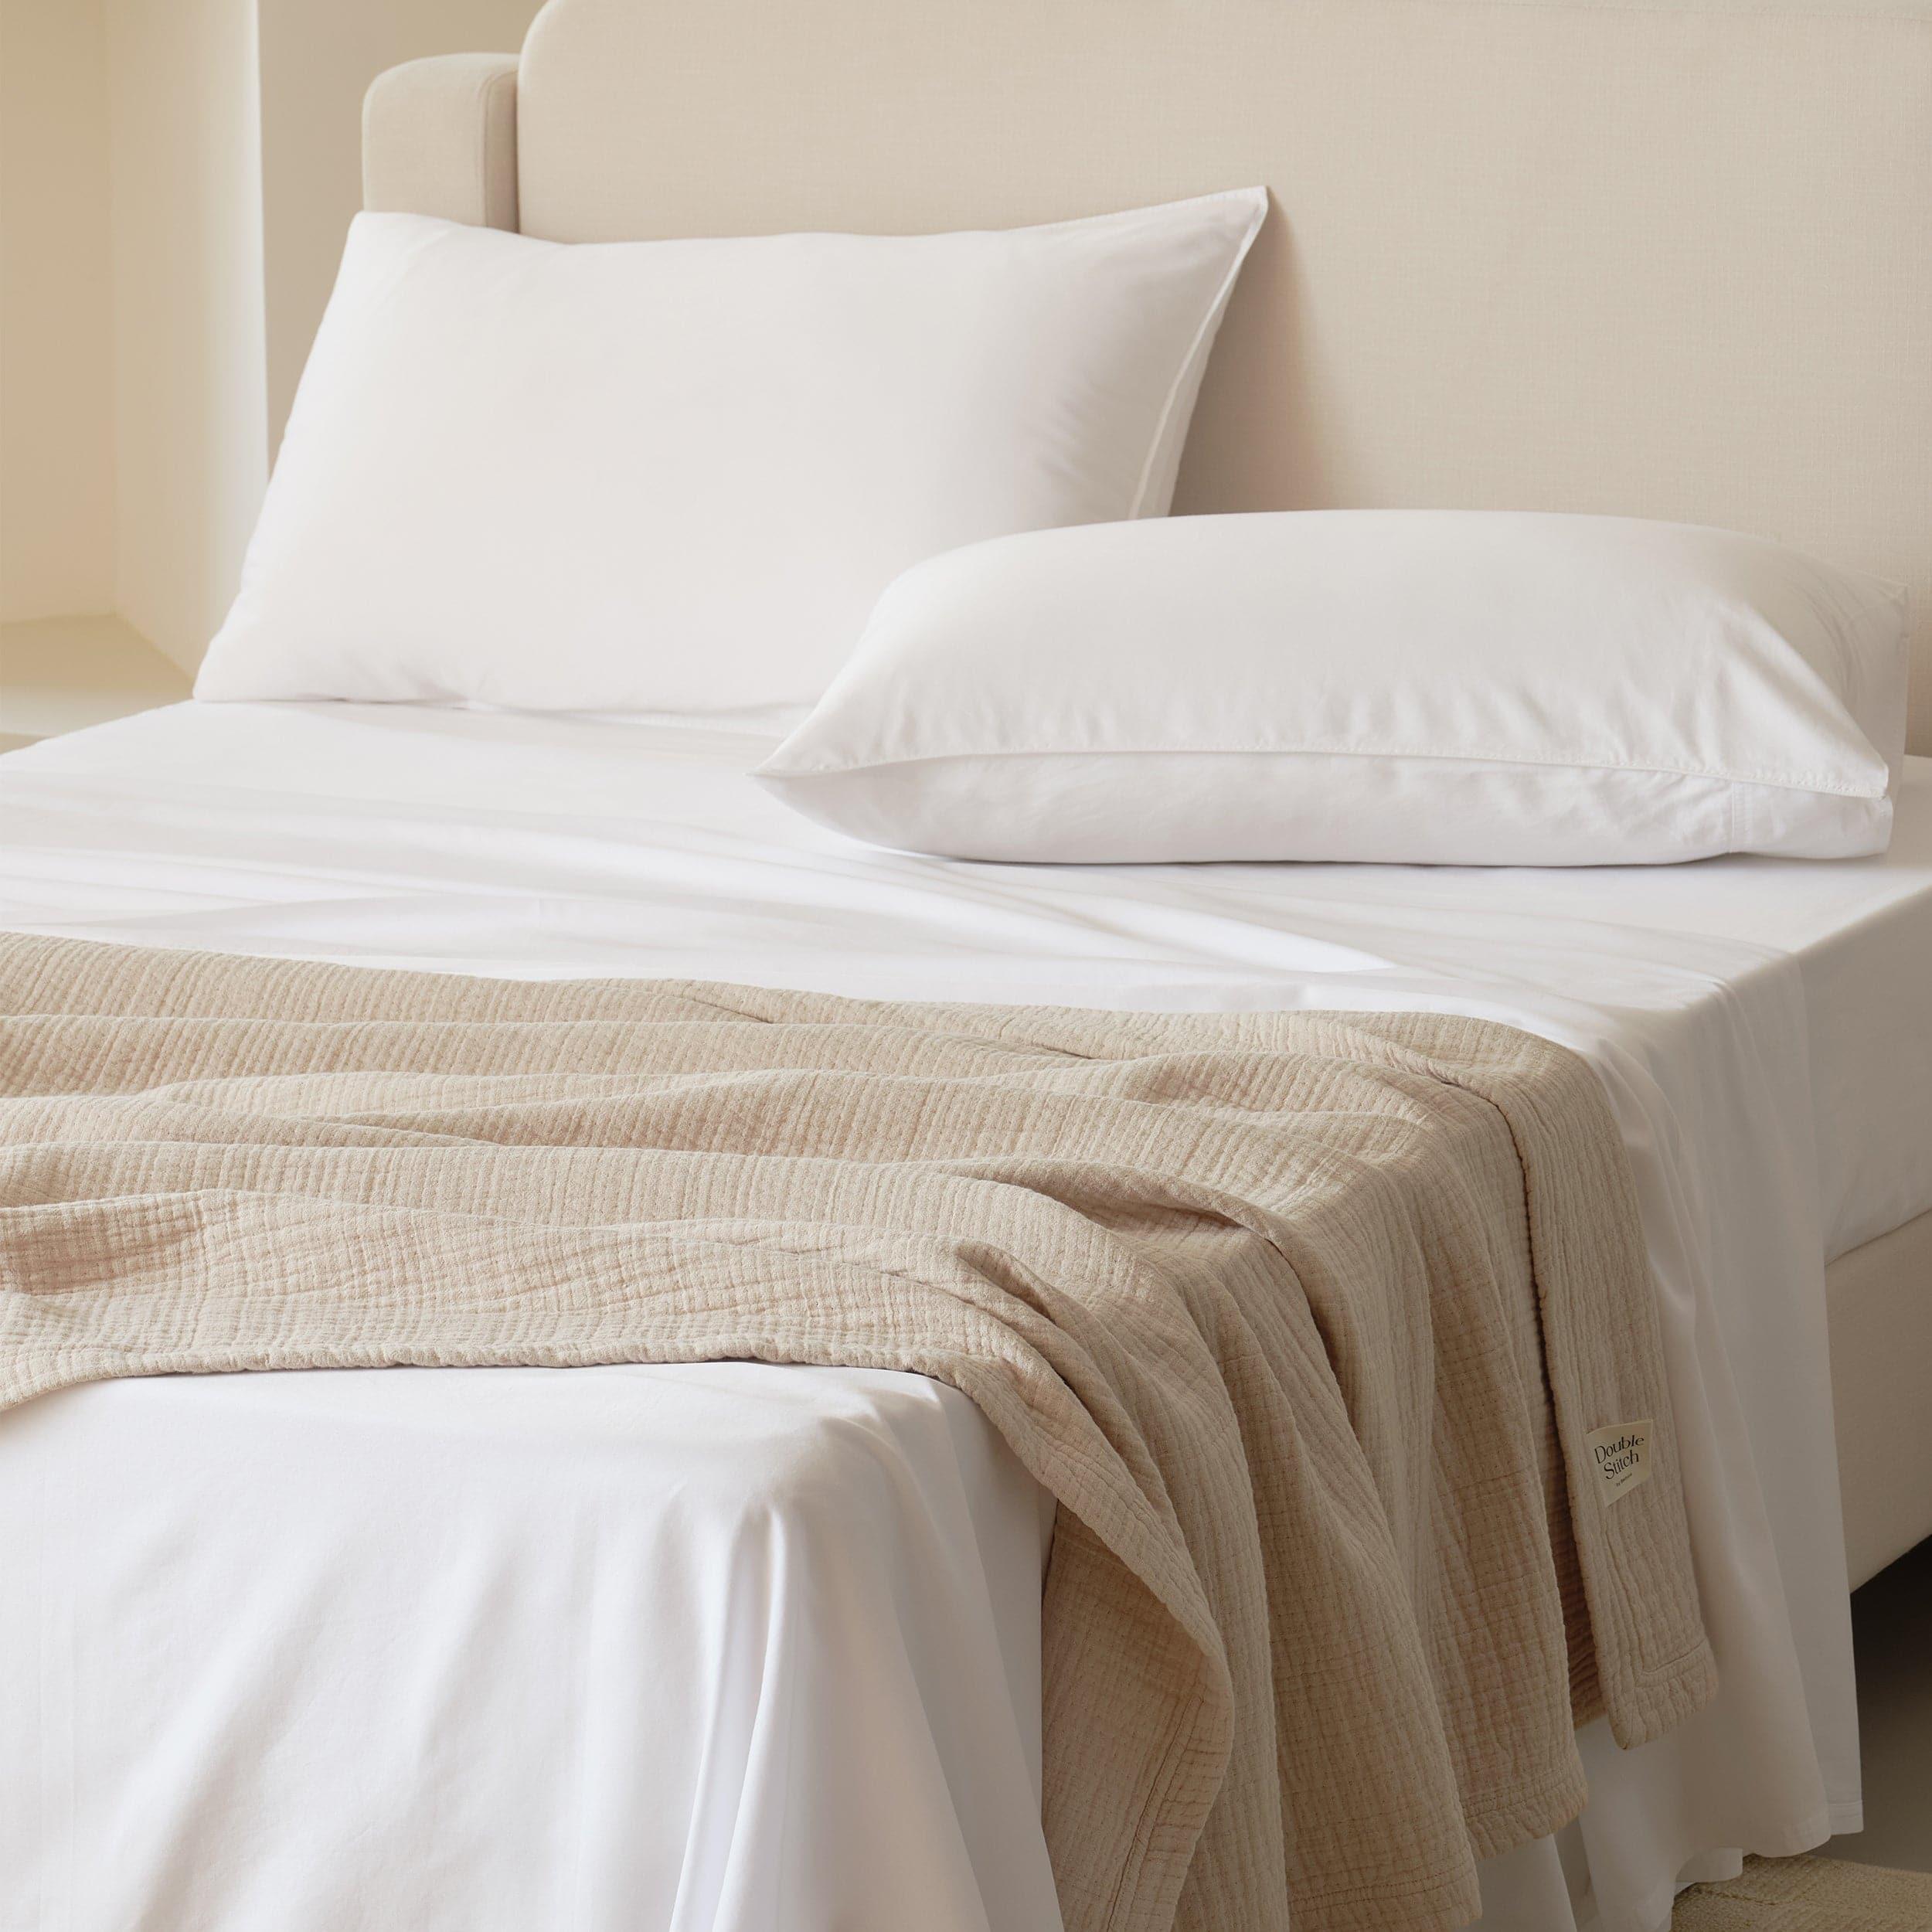 Indulge in the ultimate luxury with our California King sheets set, delivering unparalleled comfort and sophistication to your bed.